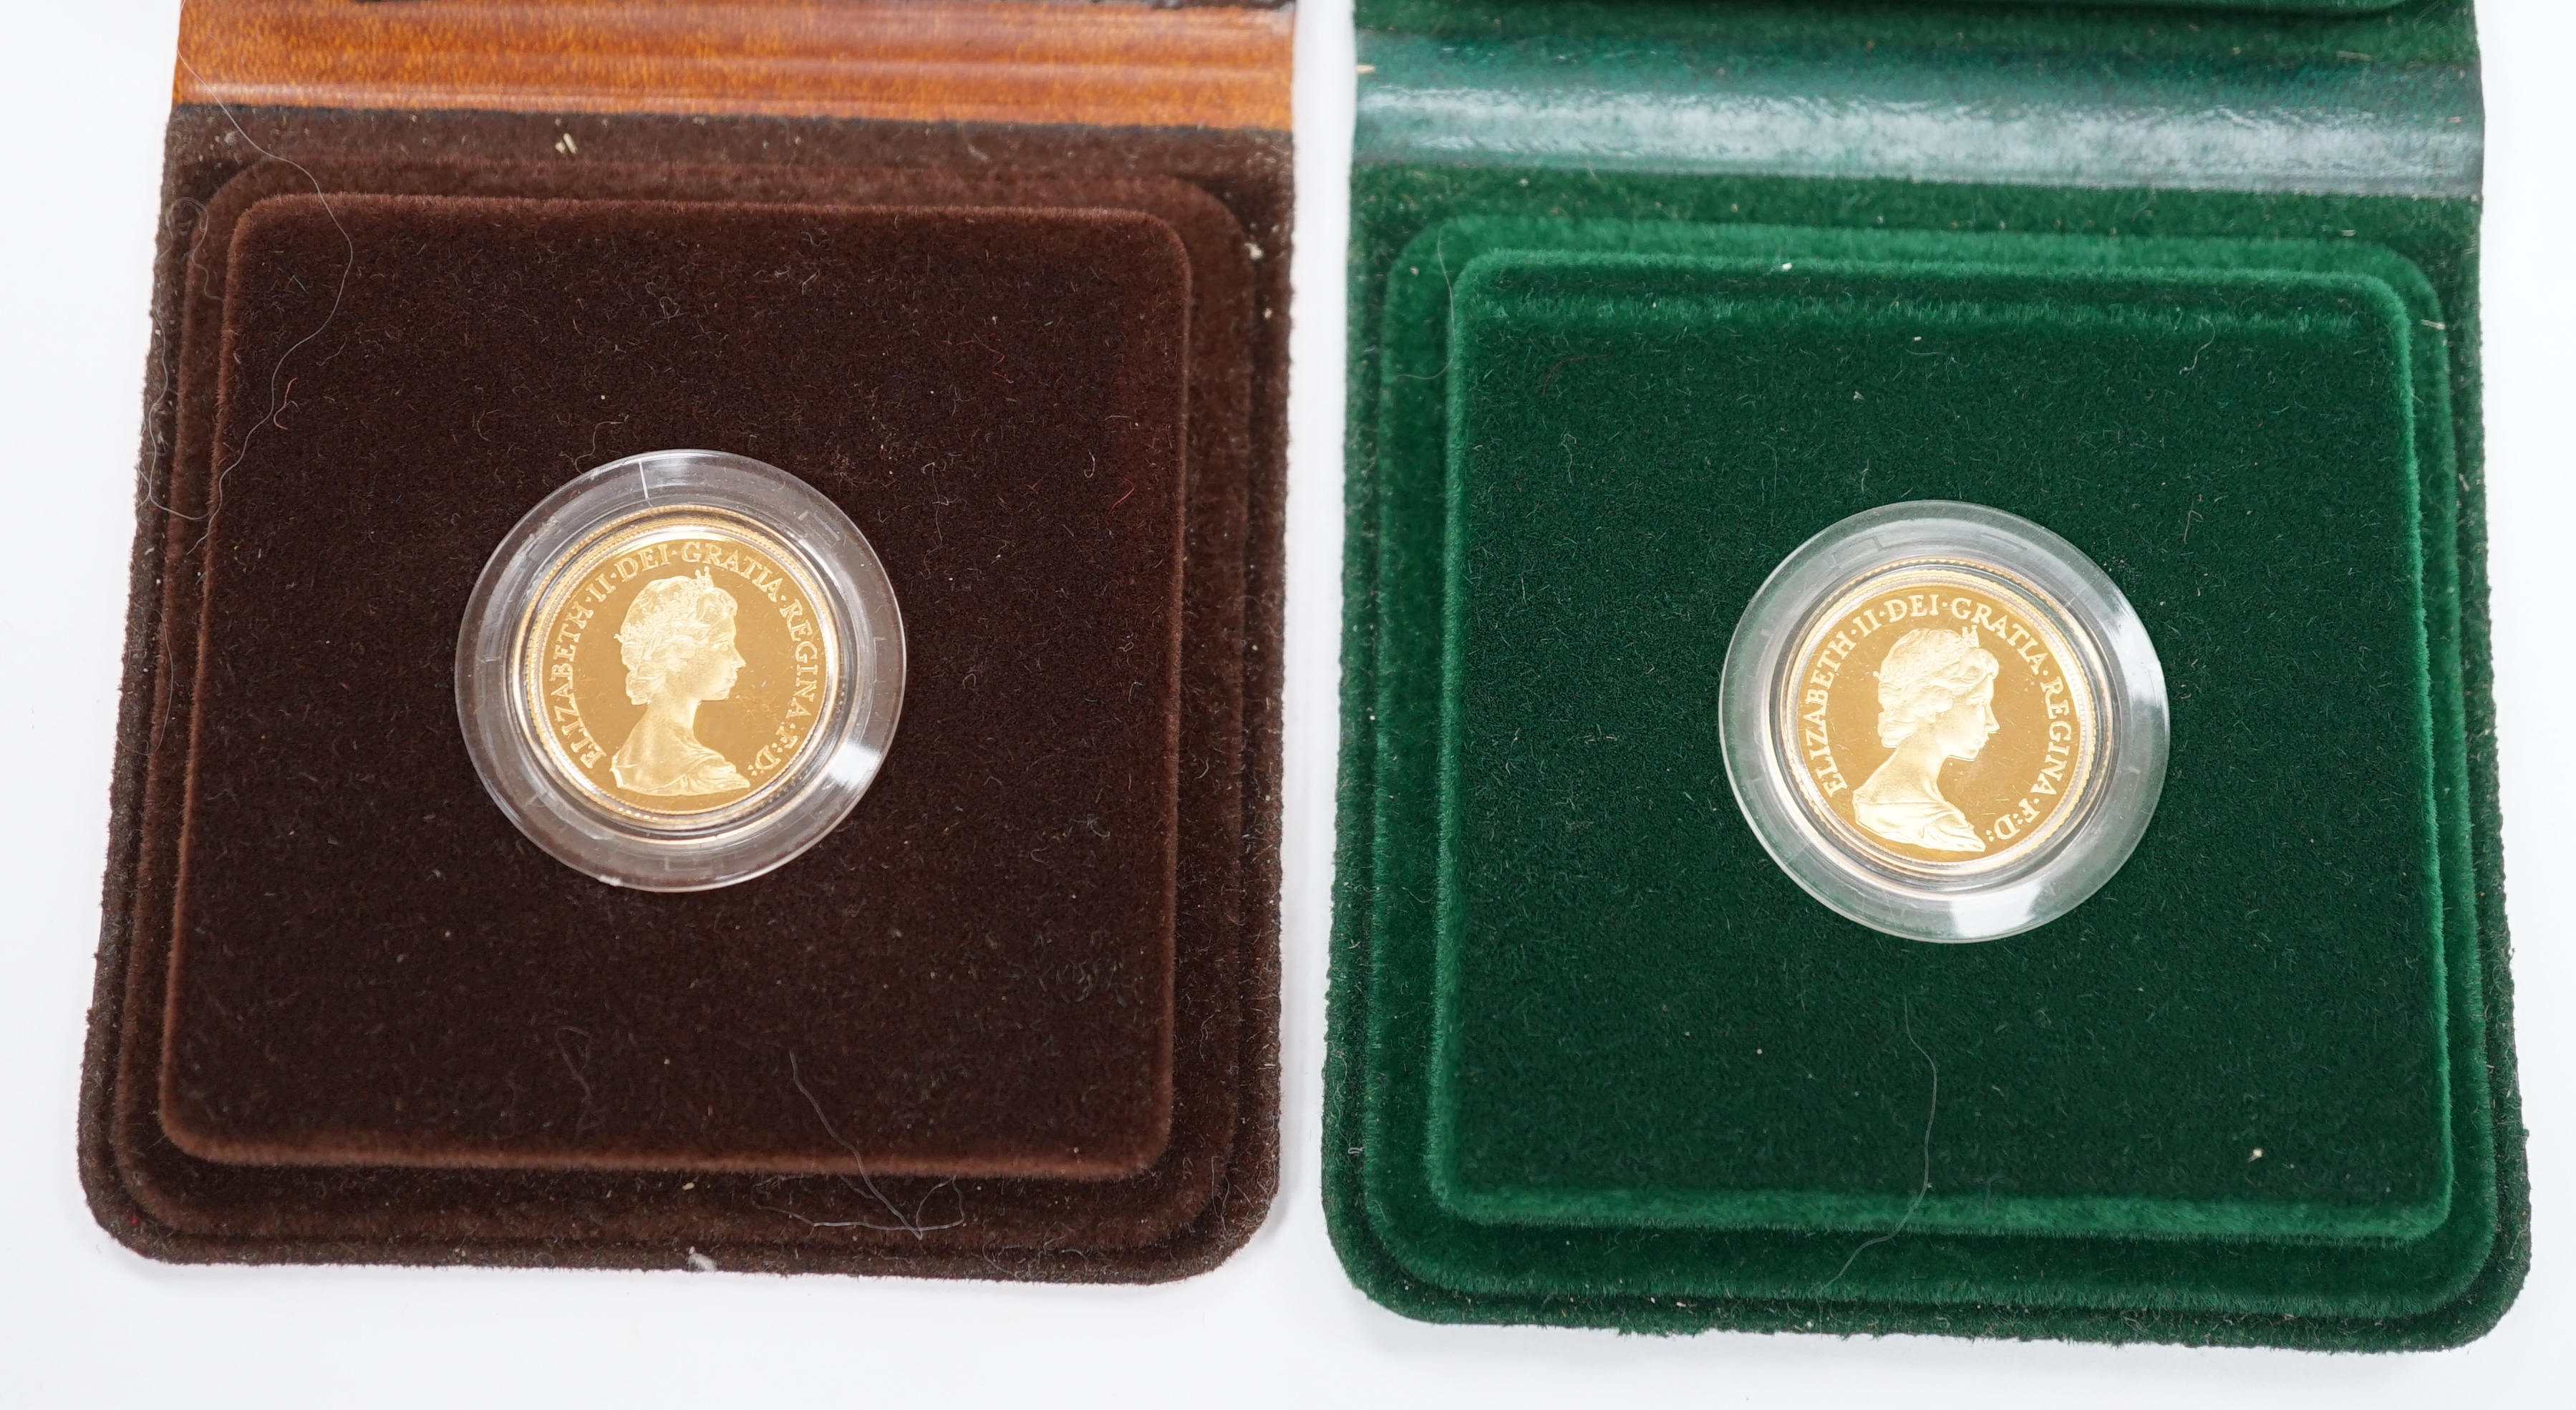 British gold coins, Elizabeth II, 1980 gold proof sovereign, in case of issue with certificate and a 1981 gold proof sovereign, in case of issue with certificate (2)